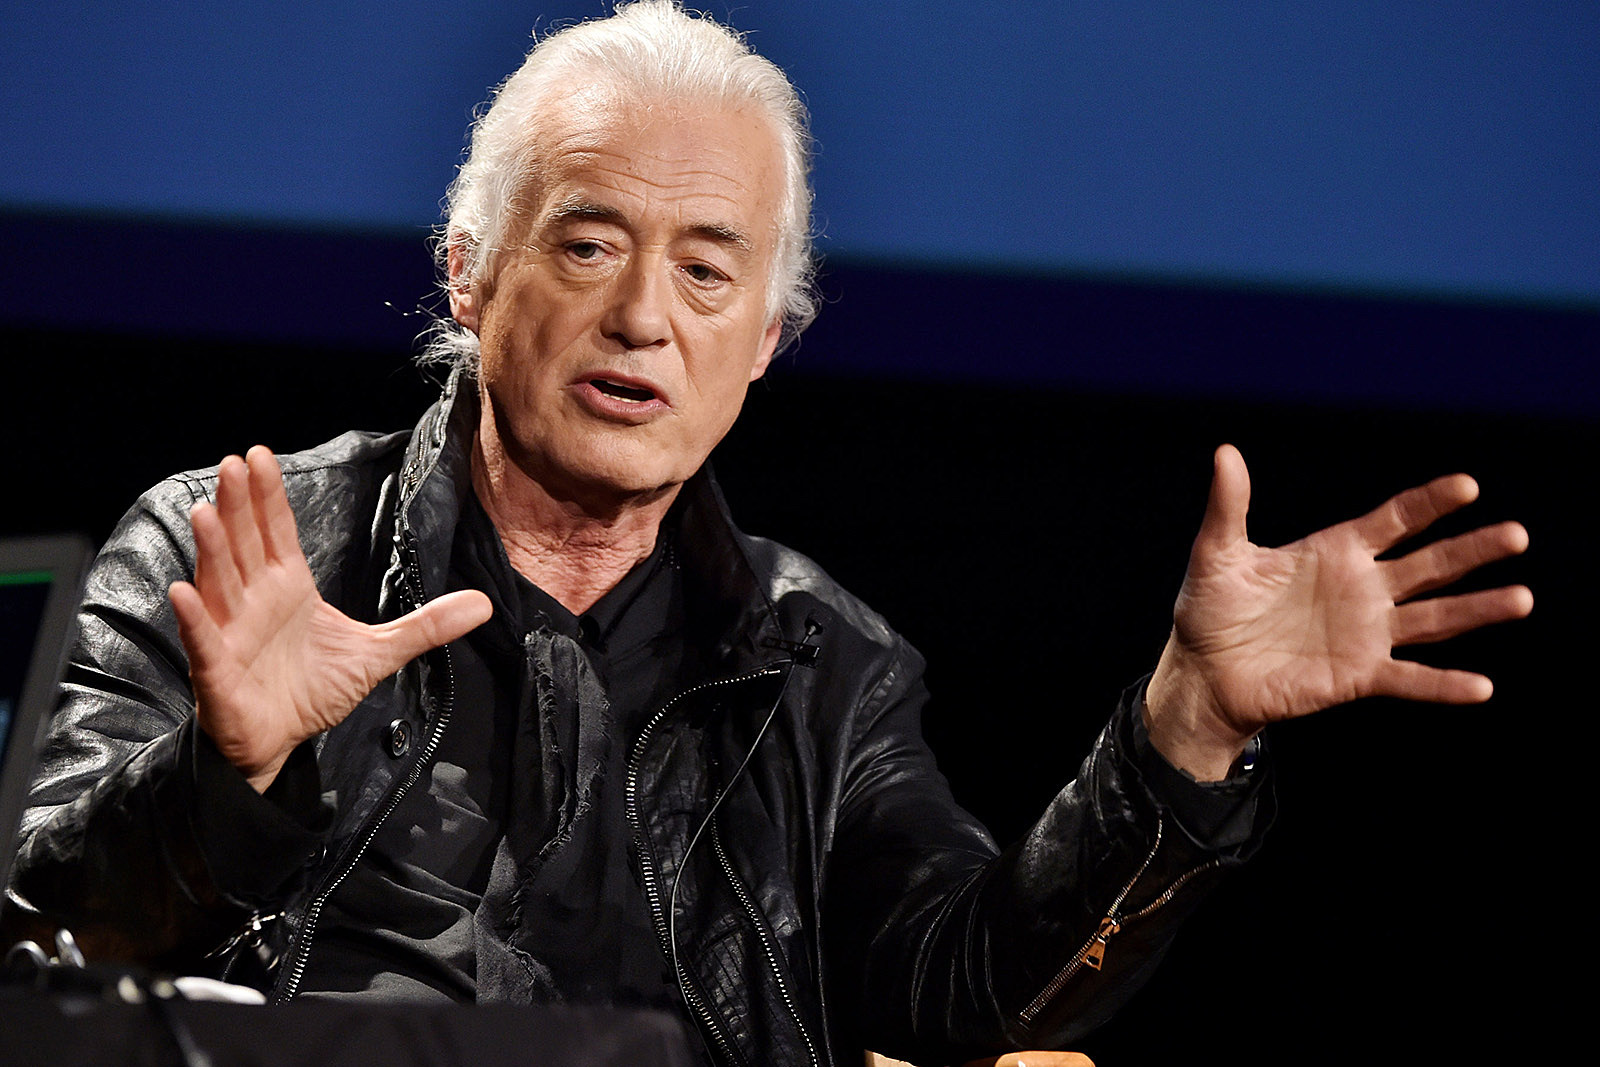 Jimmy Page's 'Paranoid' Solo Session for 'Stairway to Heaven'